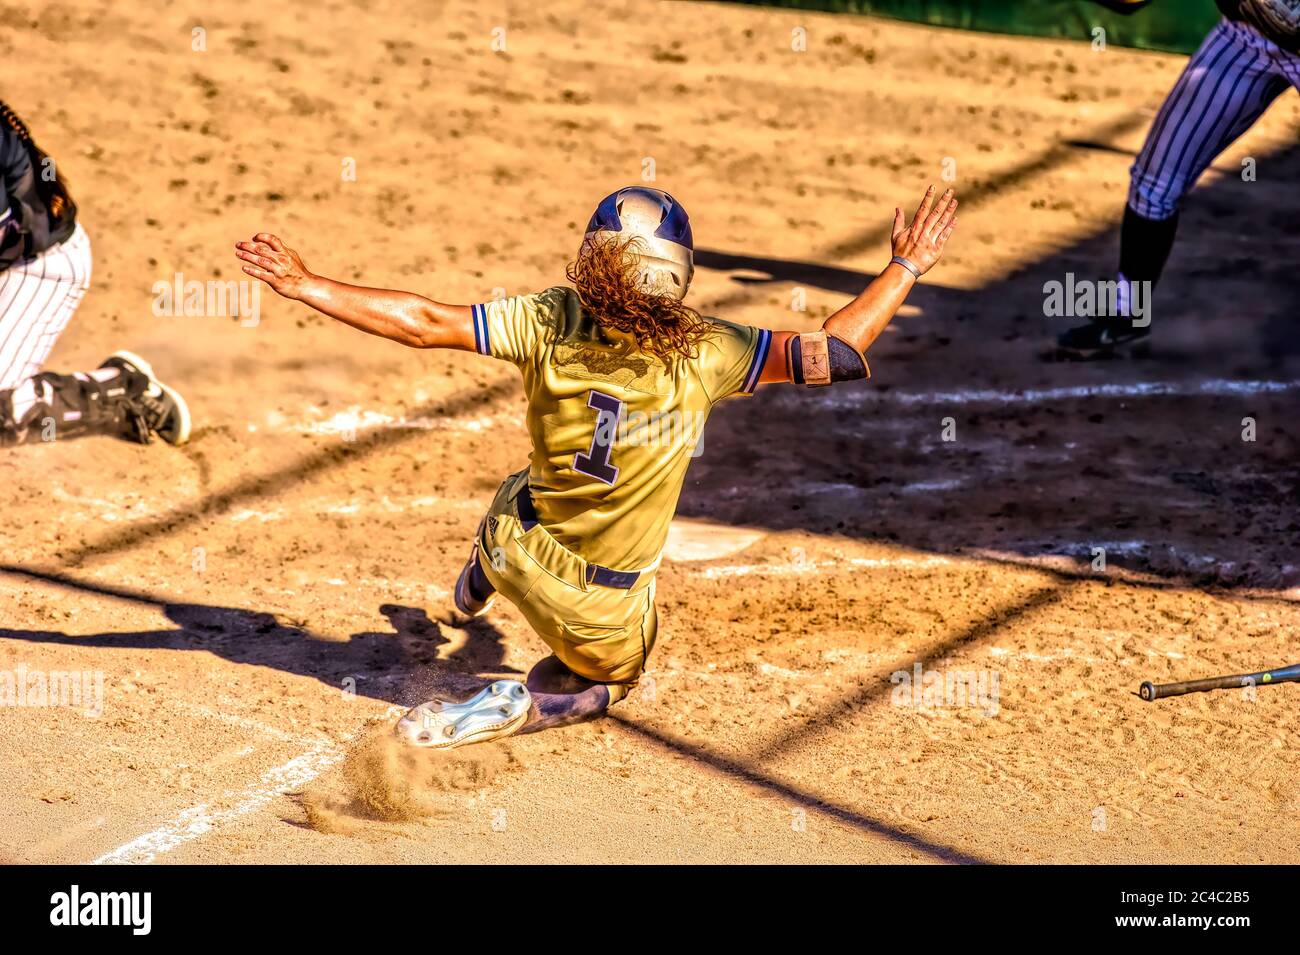 A Baseball Player is Sliding Into Home Plate Stock Photo